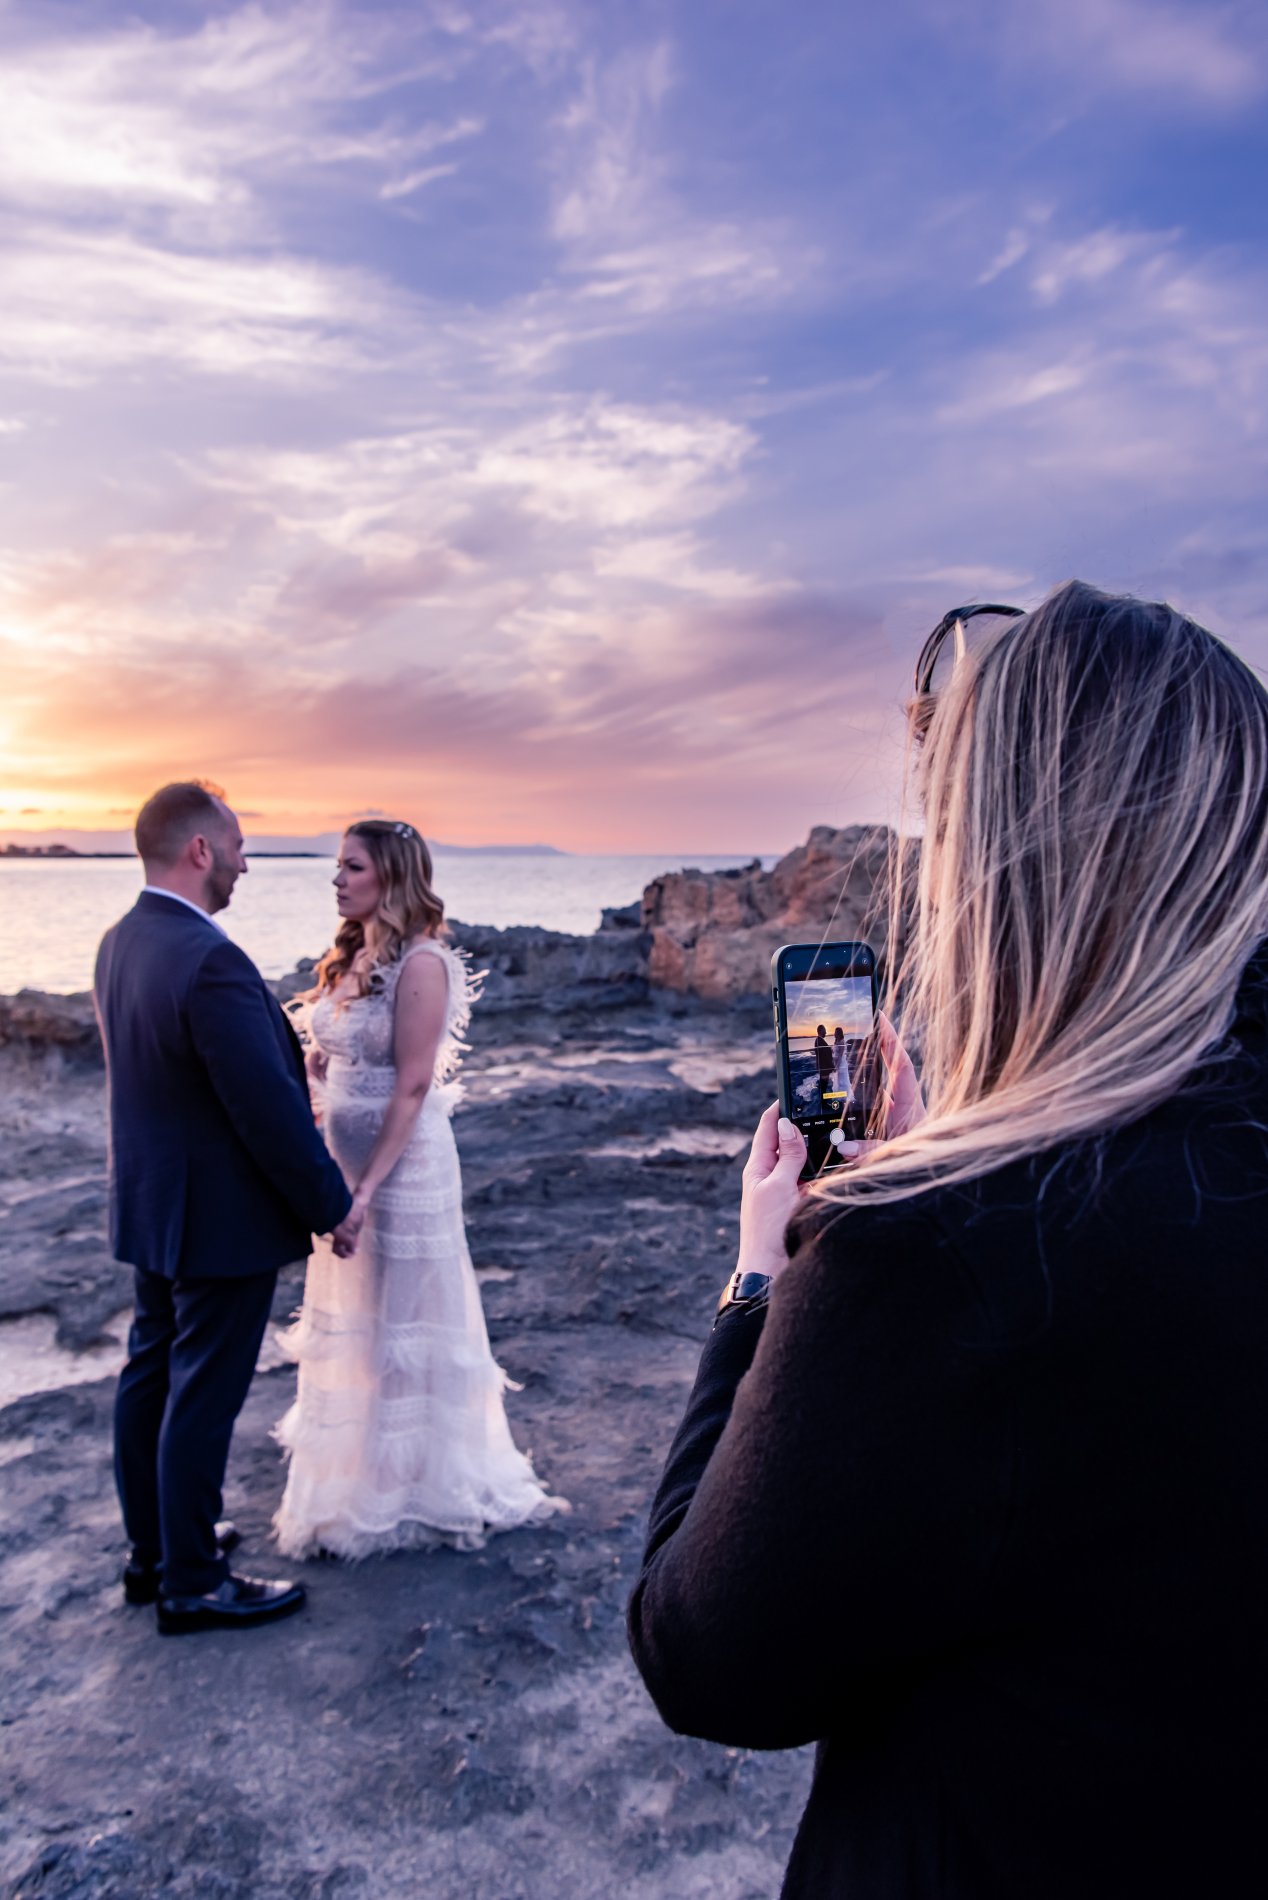 Wedding Content Creator working with a couple at a beach